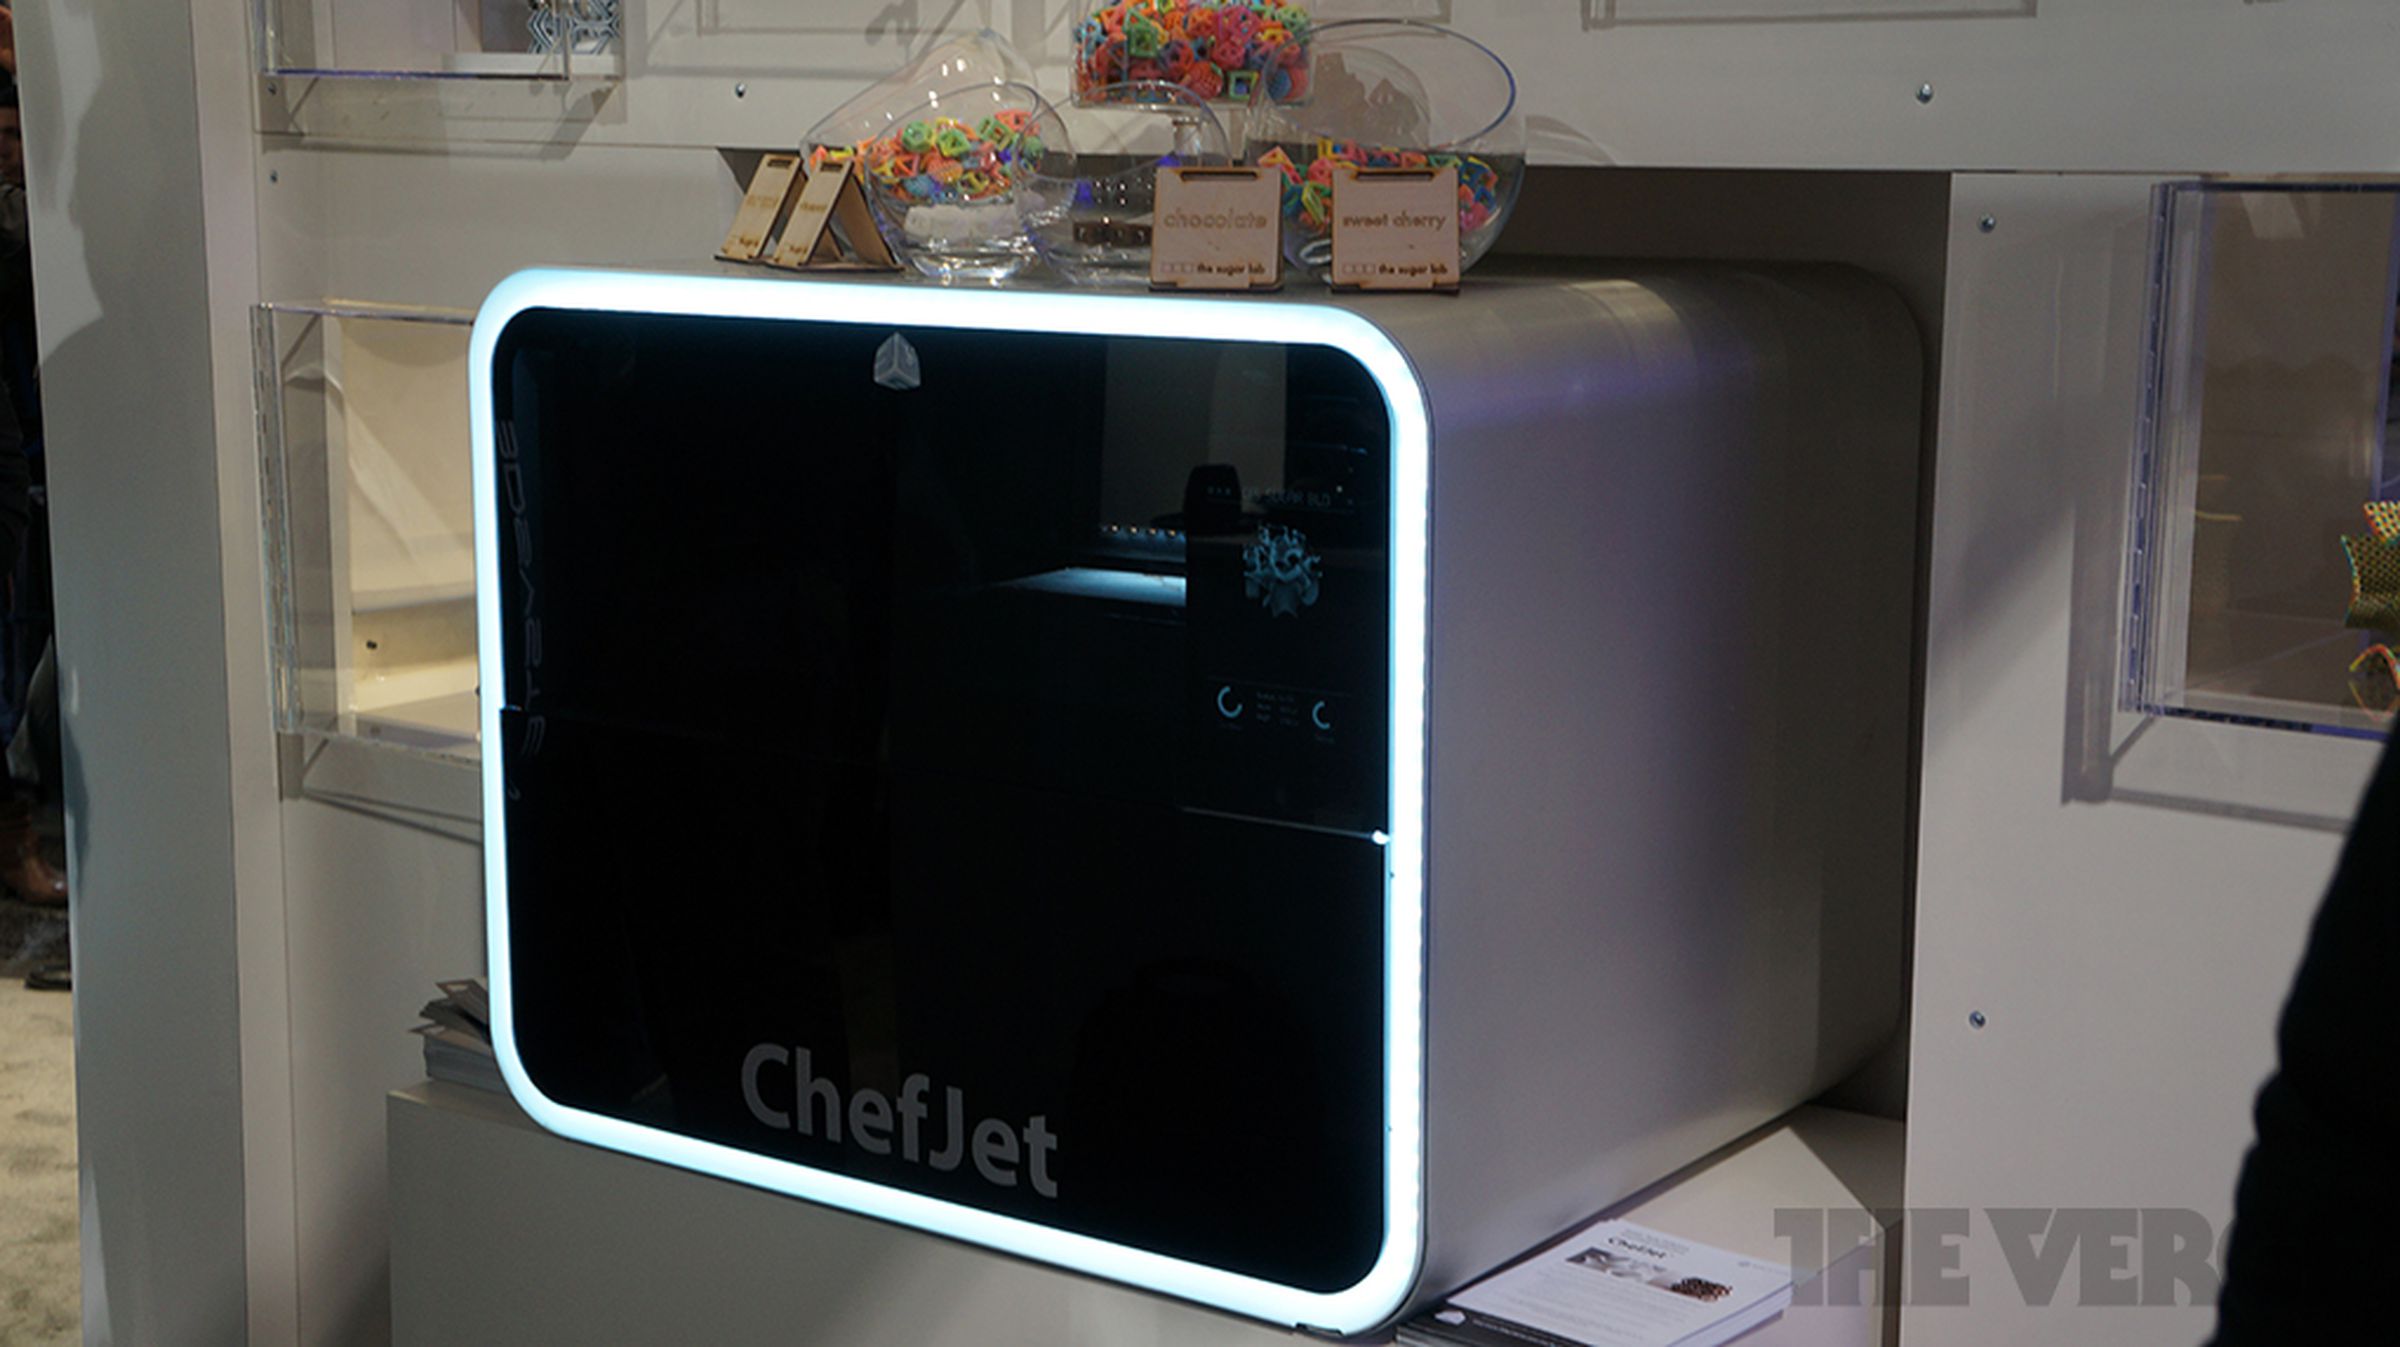 Photos of the ChefJet, ChefJet Pro, and their 3D printed candy